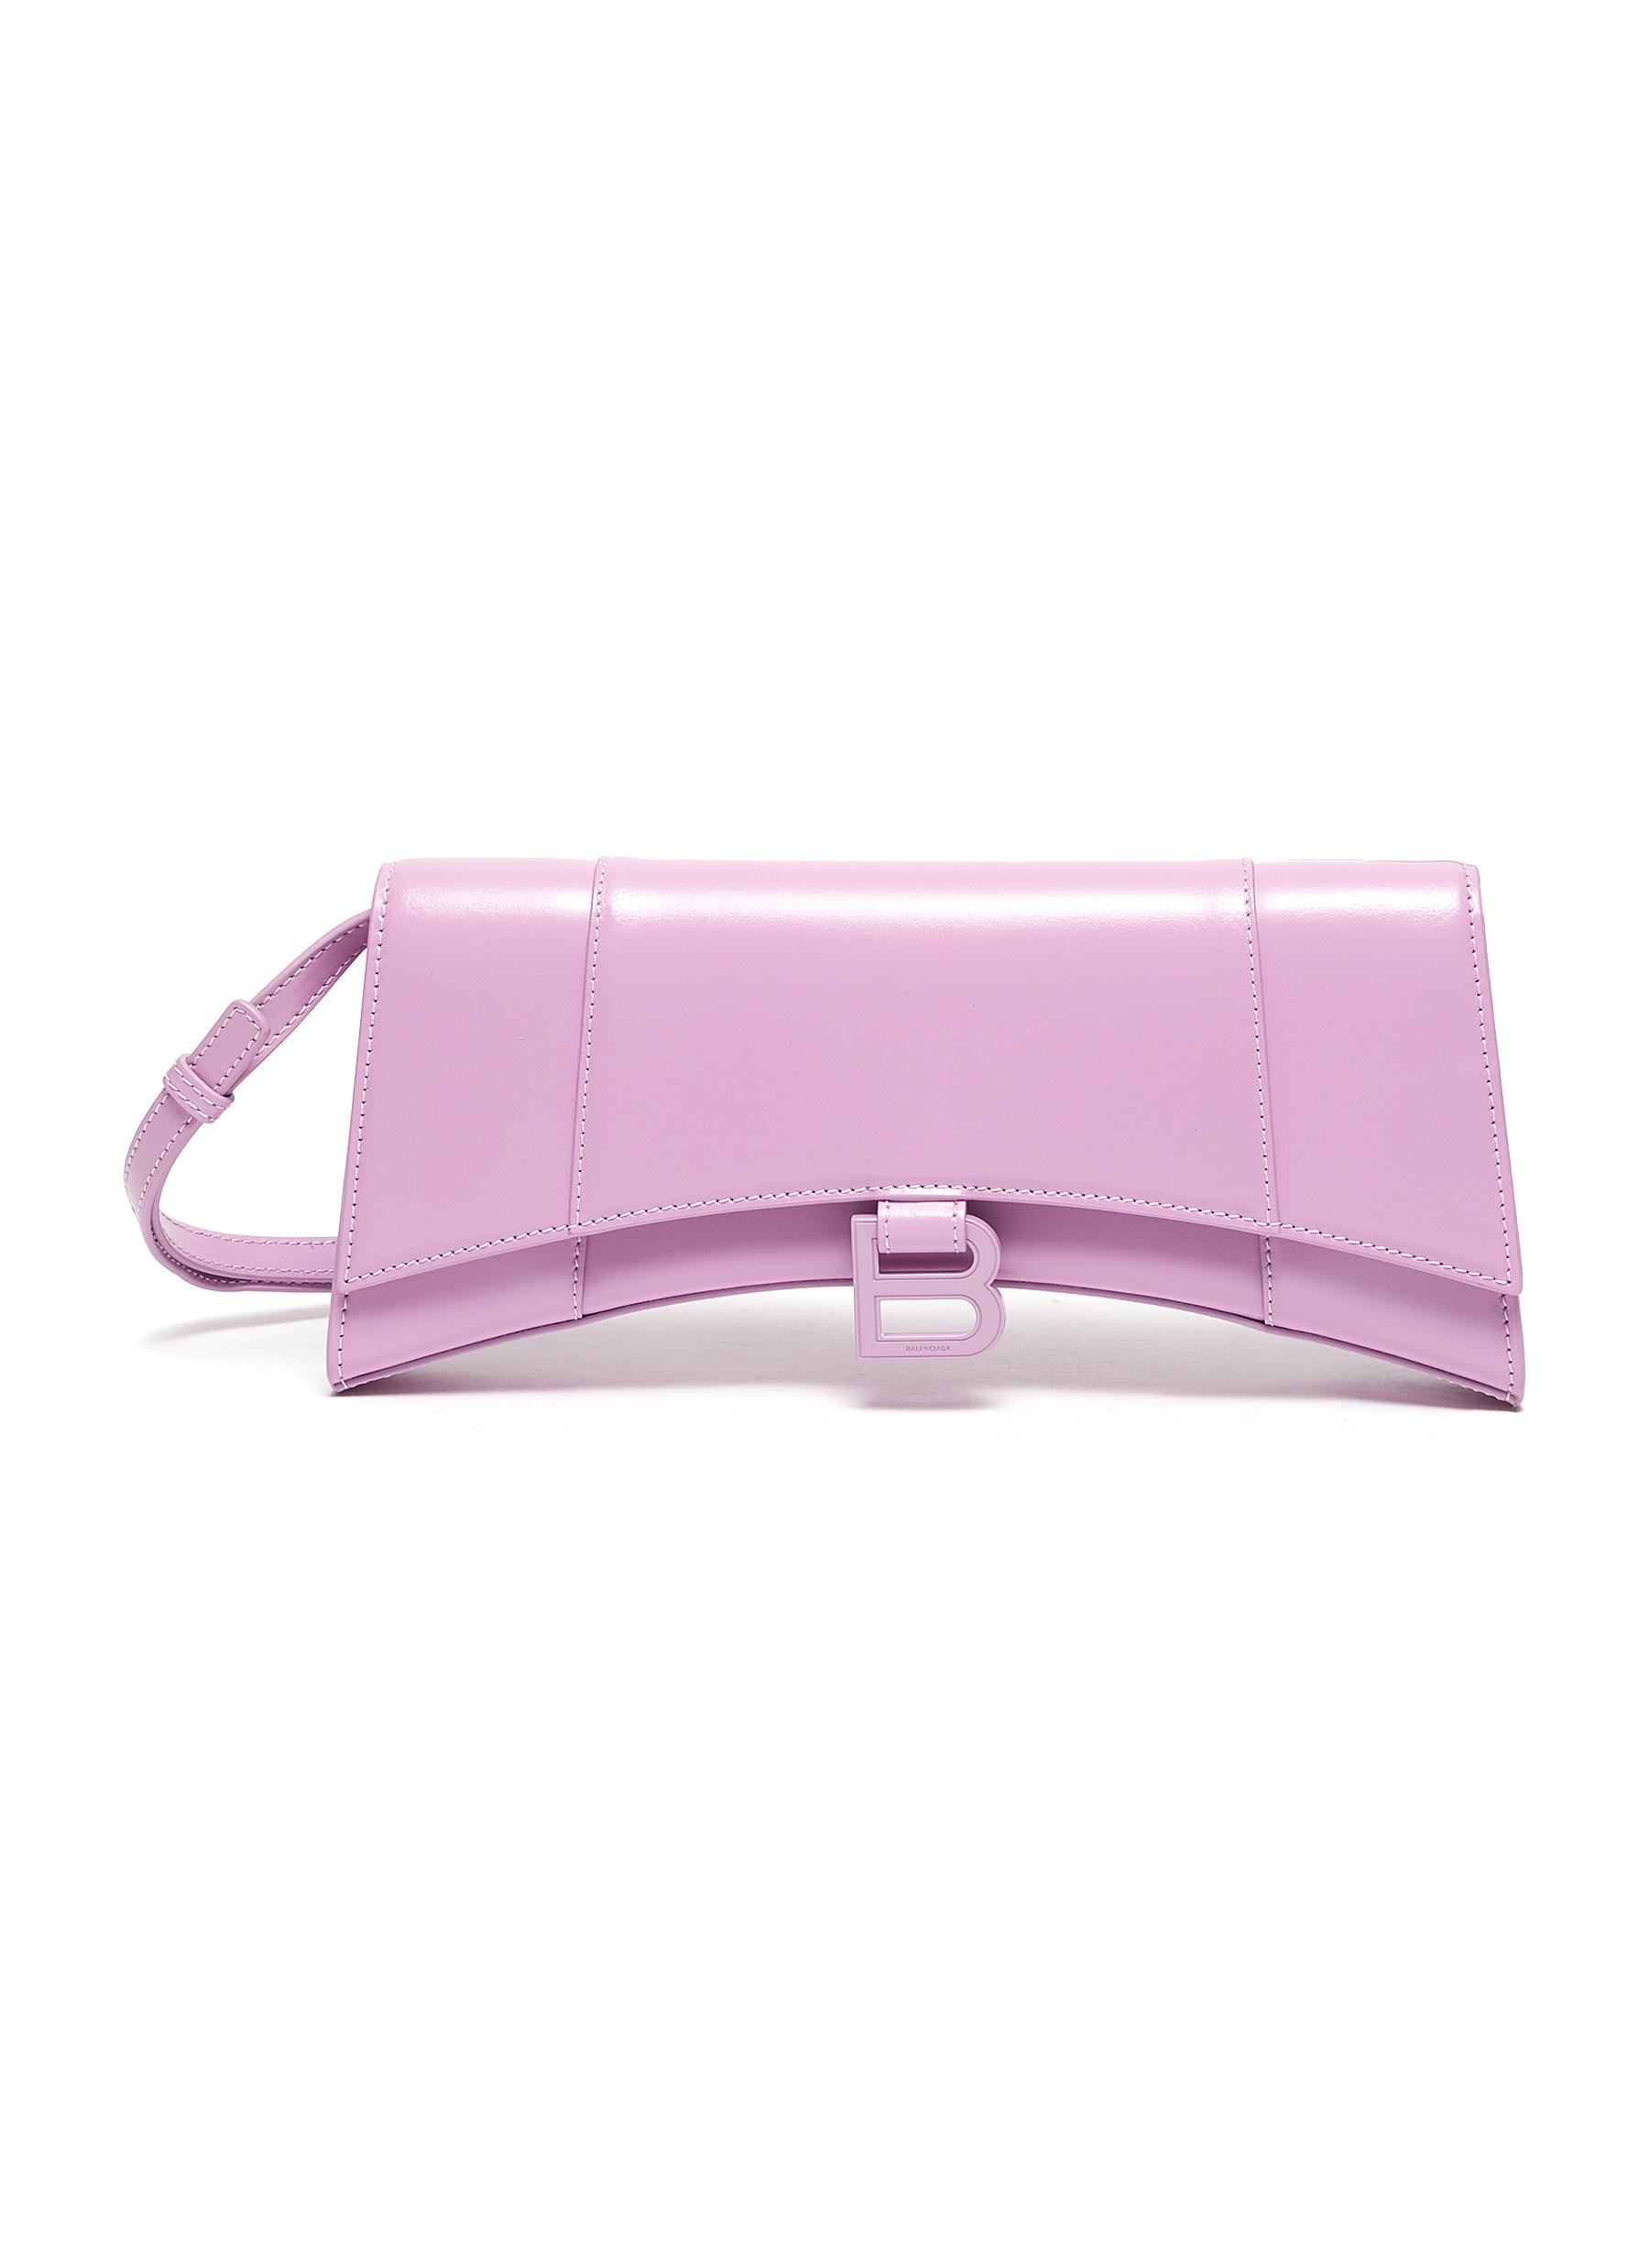 BALENCIAGA 'HOURGLASS STRETCHED' LEATHER TOP HANDLE BAG